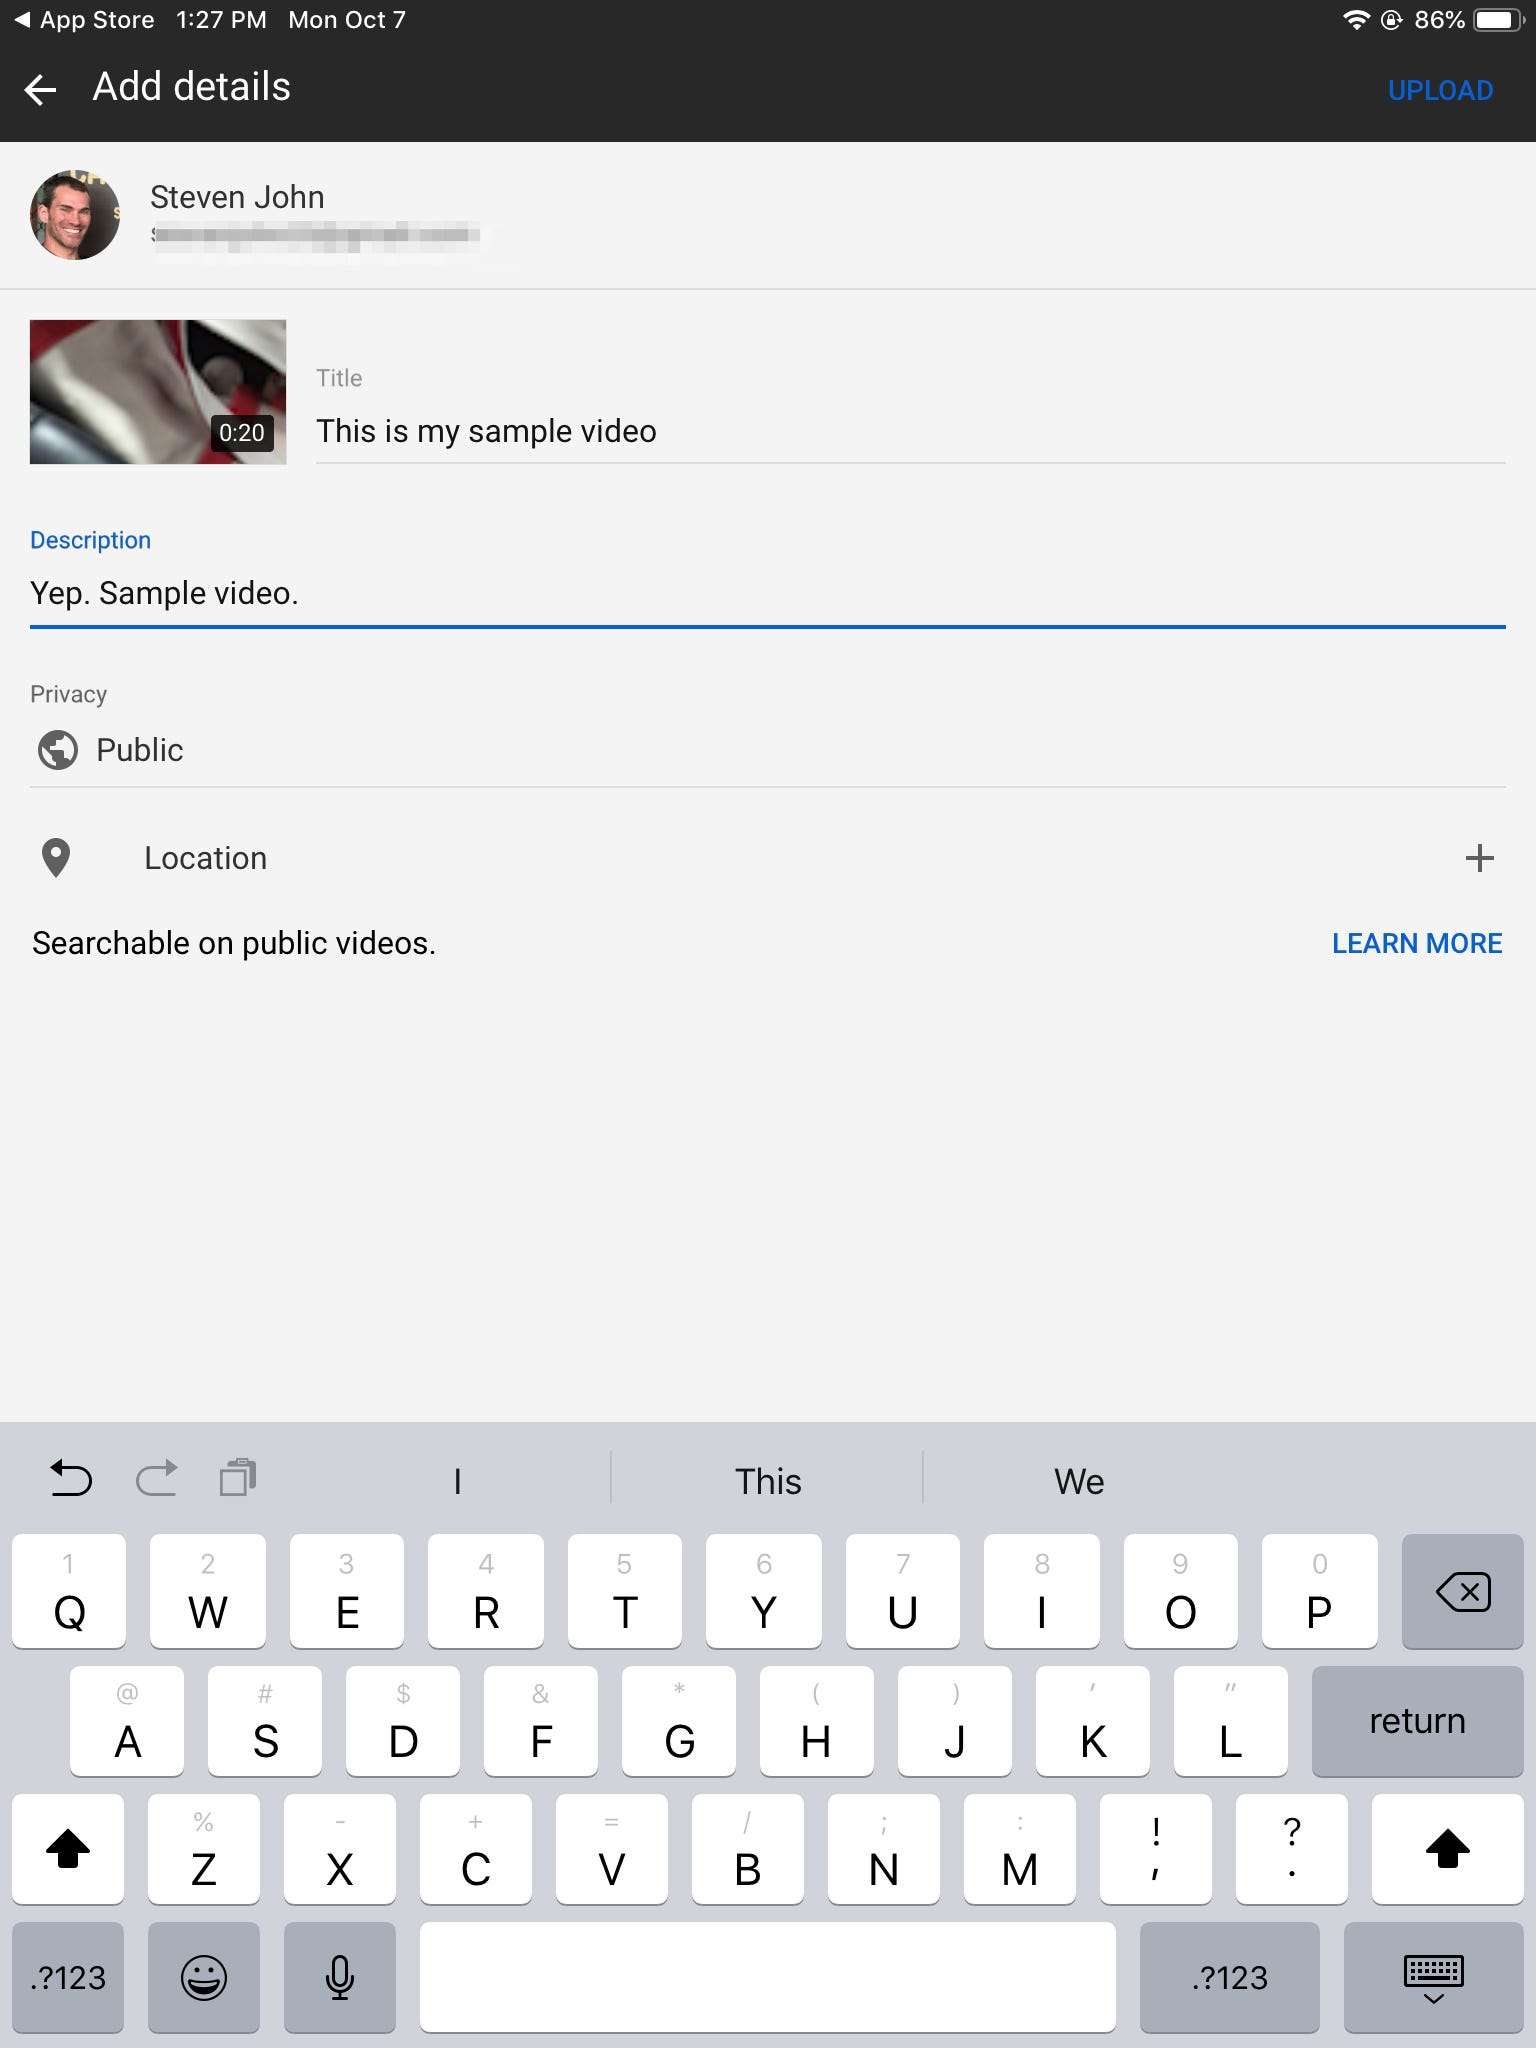 How to upload a video to YouTube from your iPad in 4 steps | Business